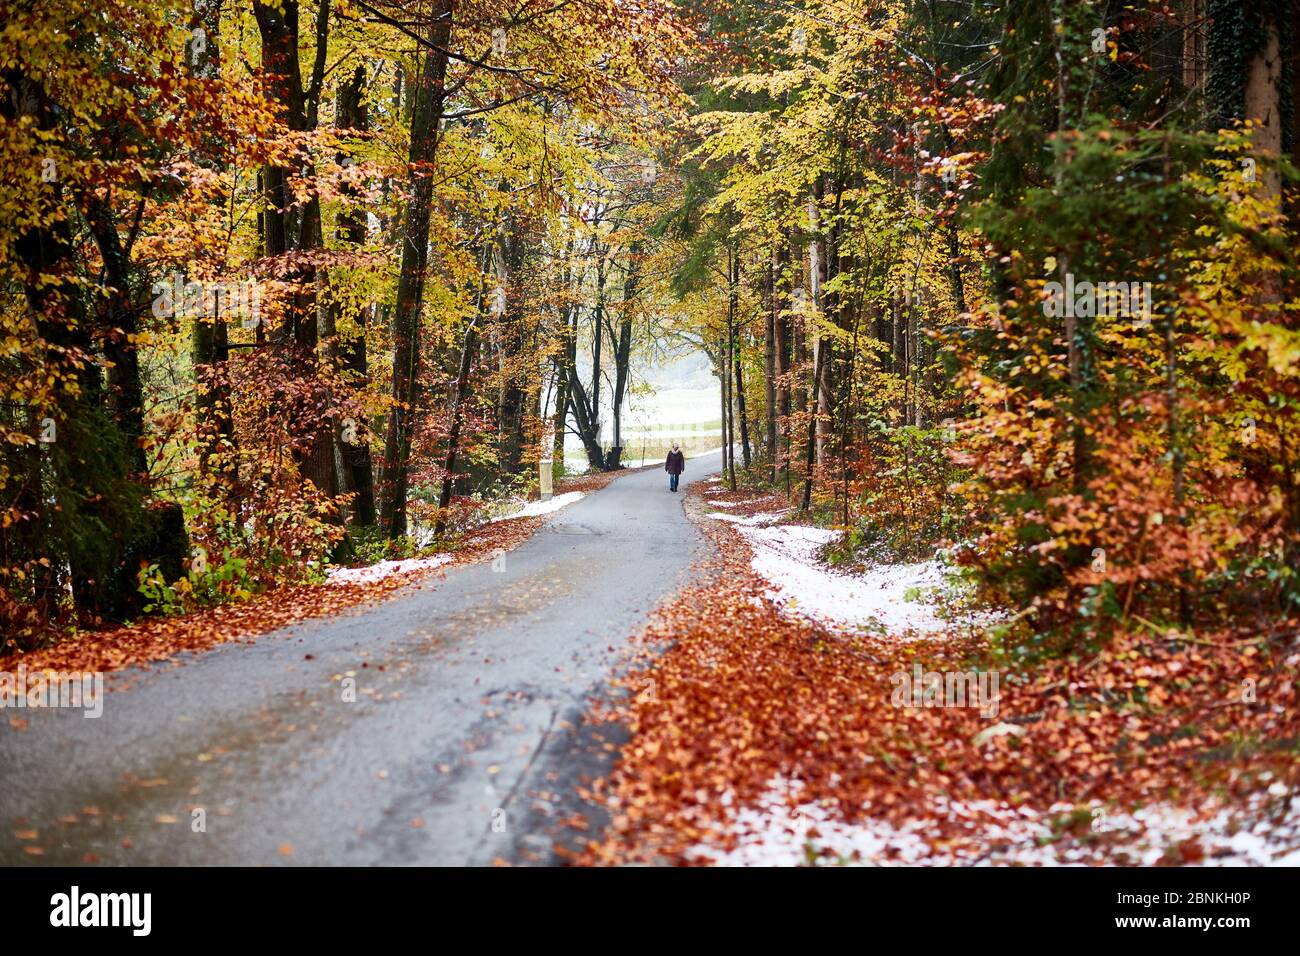 Country road, wet, snow, ice, trees, leaves, pedestrians Stock Photo